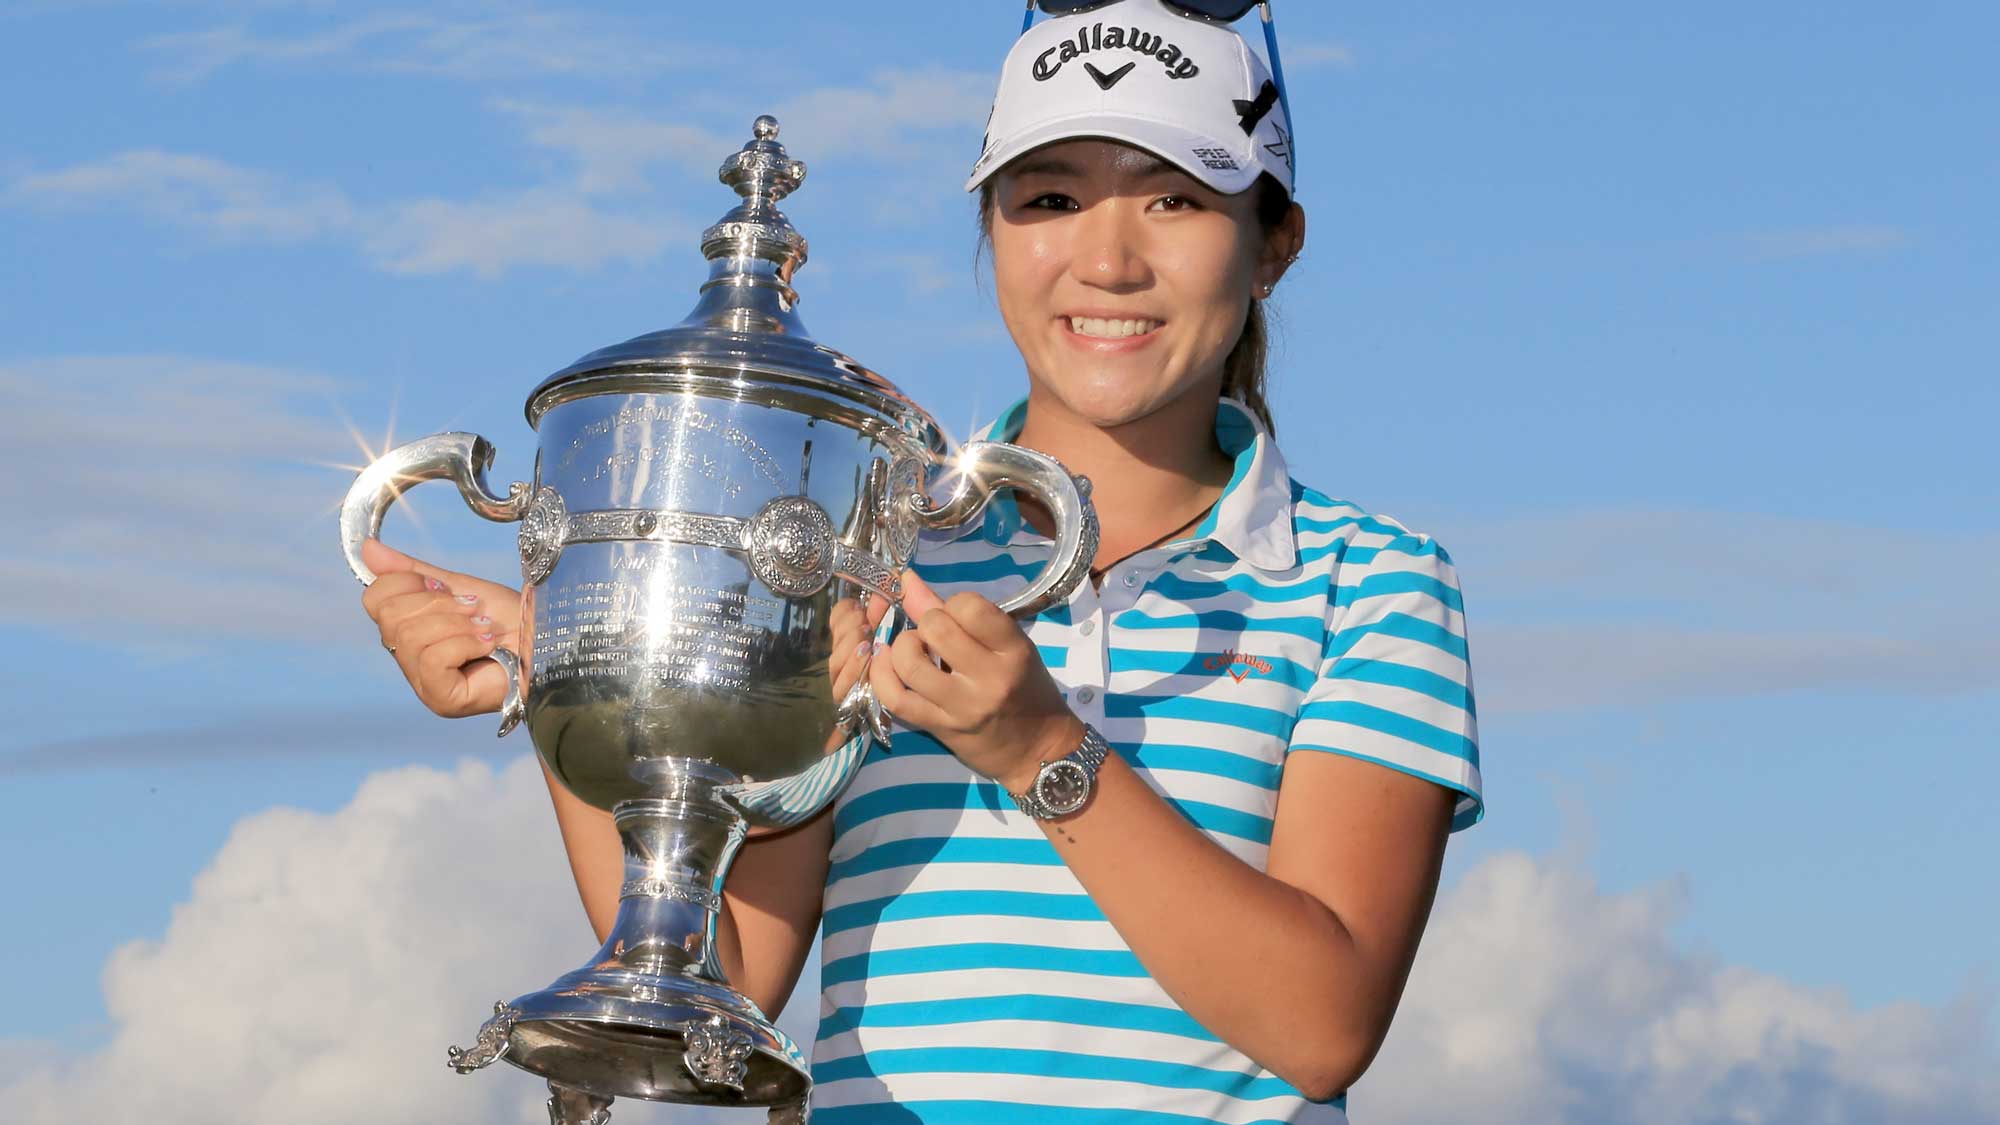 Lydia Ko of New Zealand poses with the Rolex Player of the Year trophy during the final round of the CME Group Tour Championship at Tiburon Golf Club